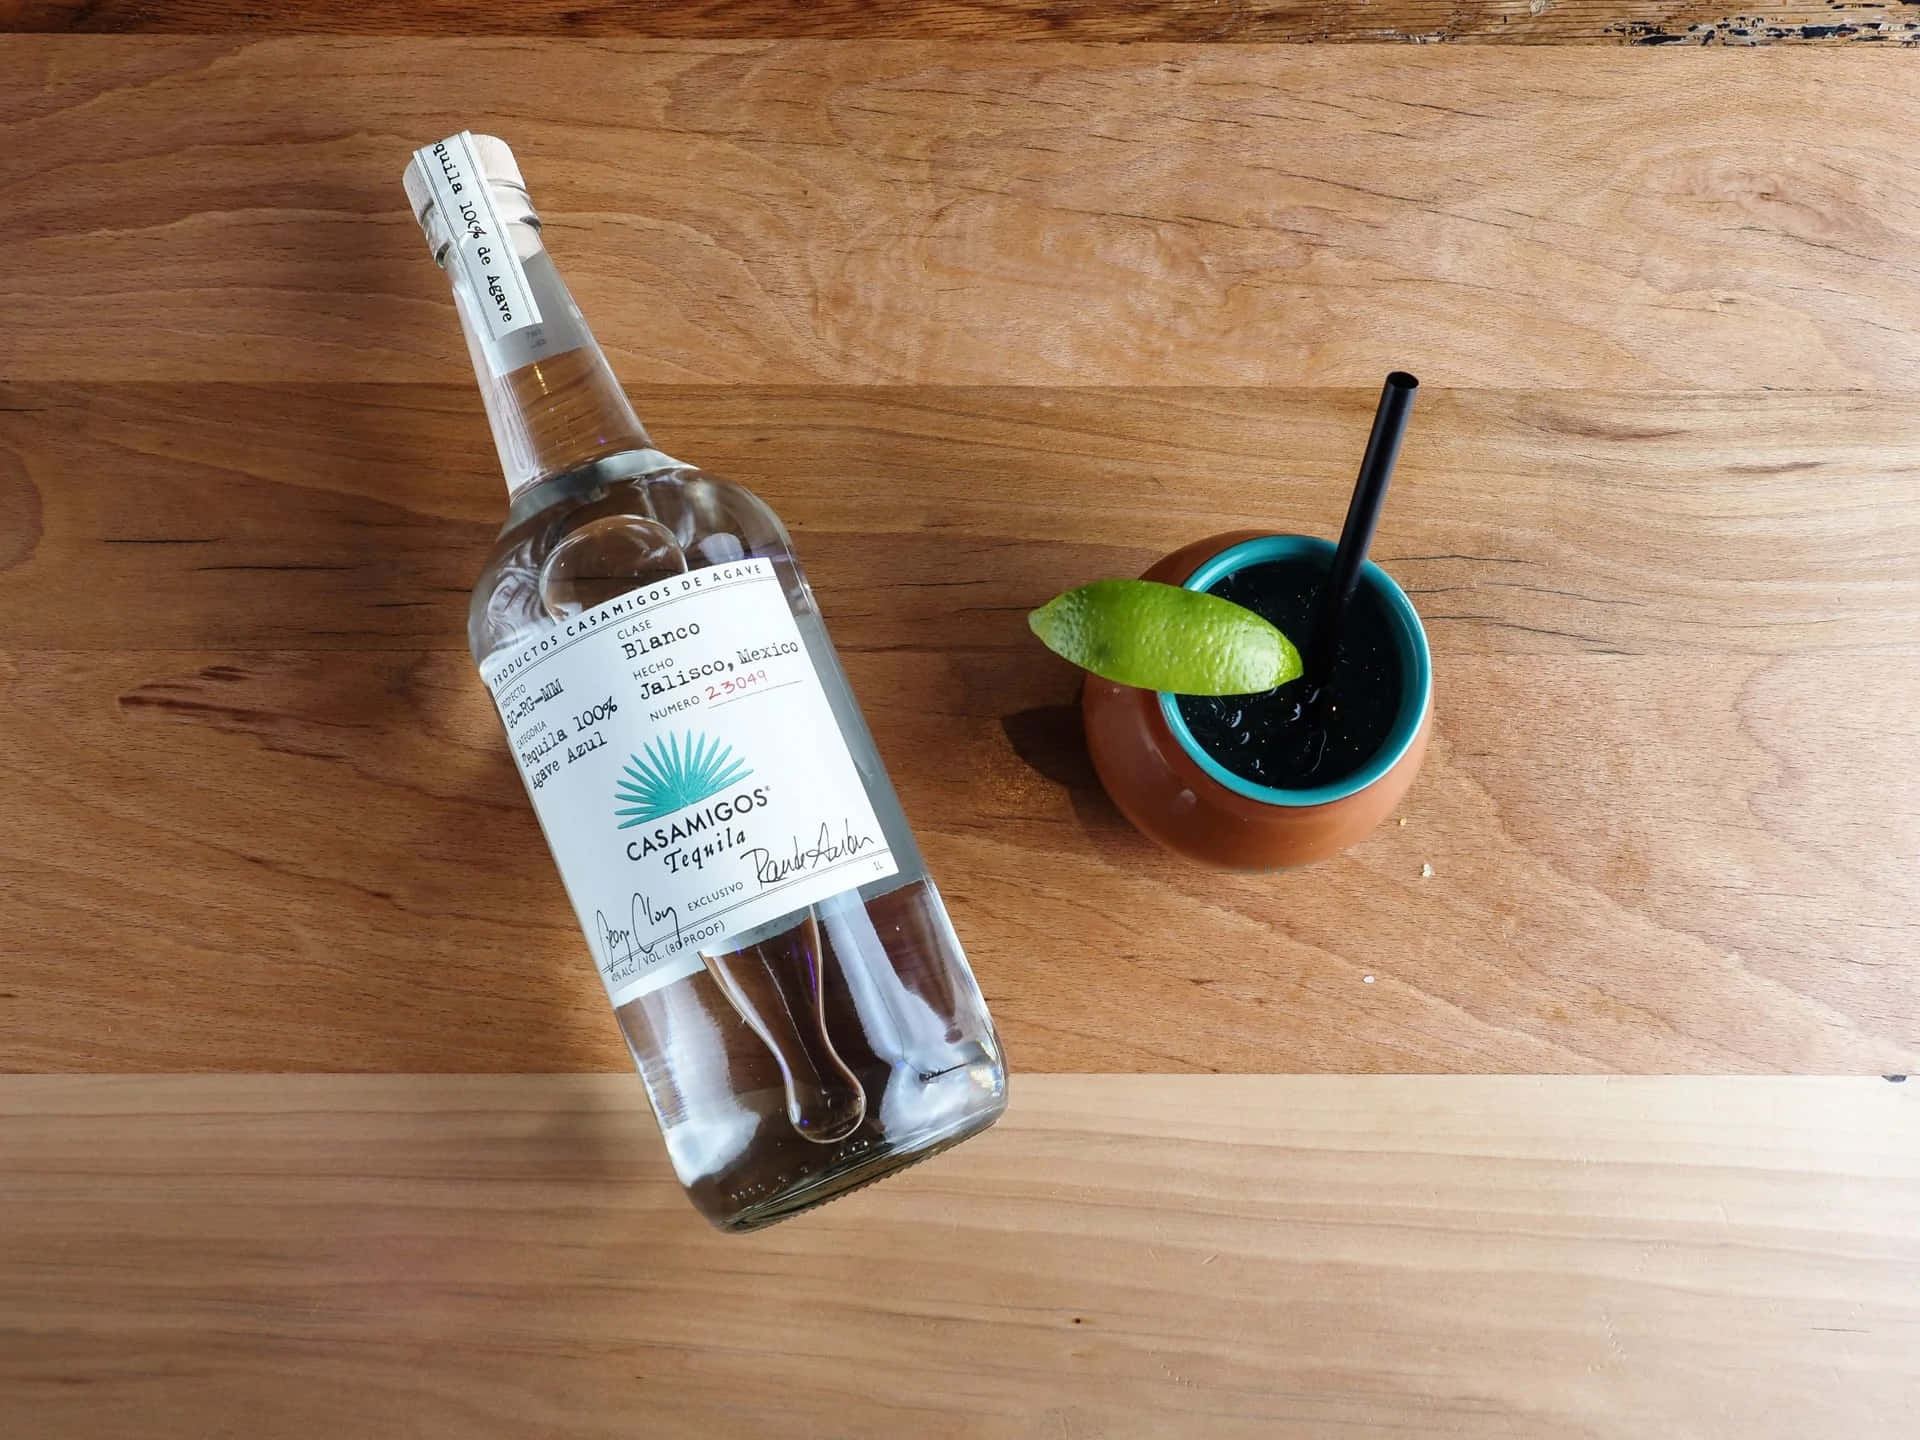 Caption: Exceptional Taste with Casamigos Tequila Blanco Mule Cocktail Wallpaper